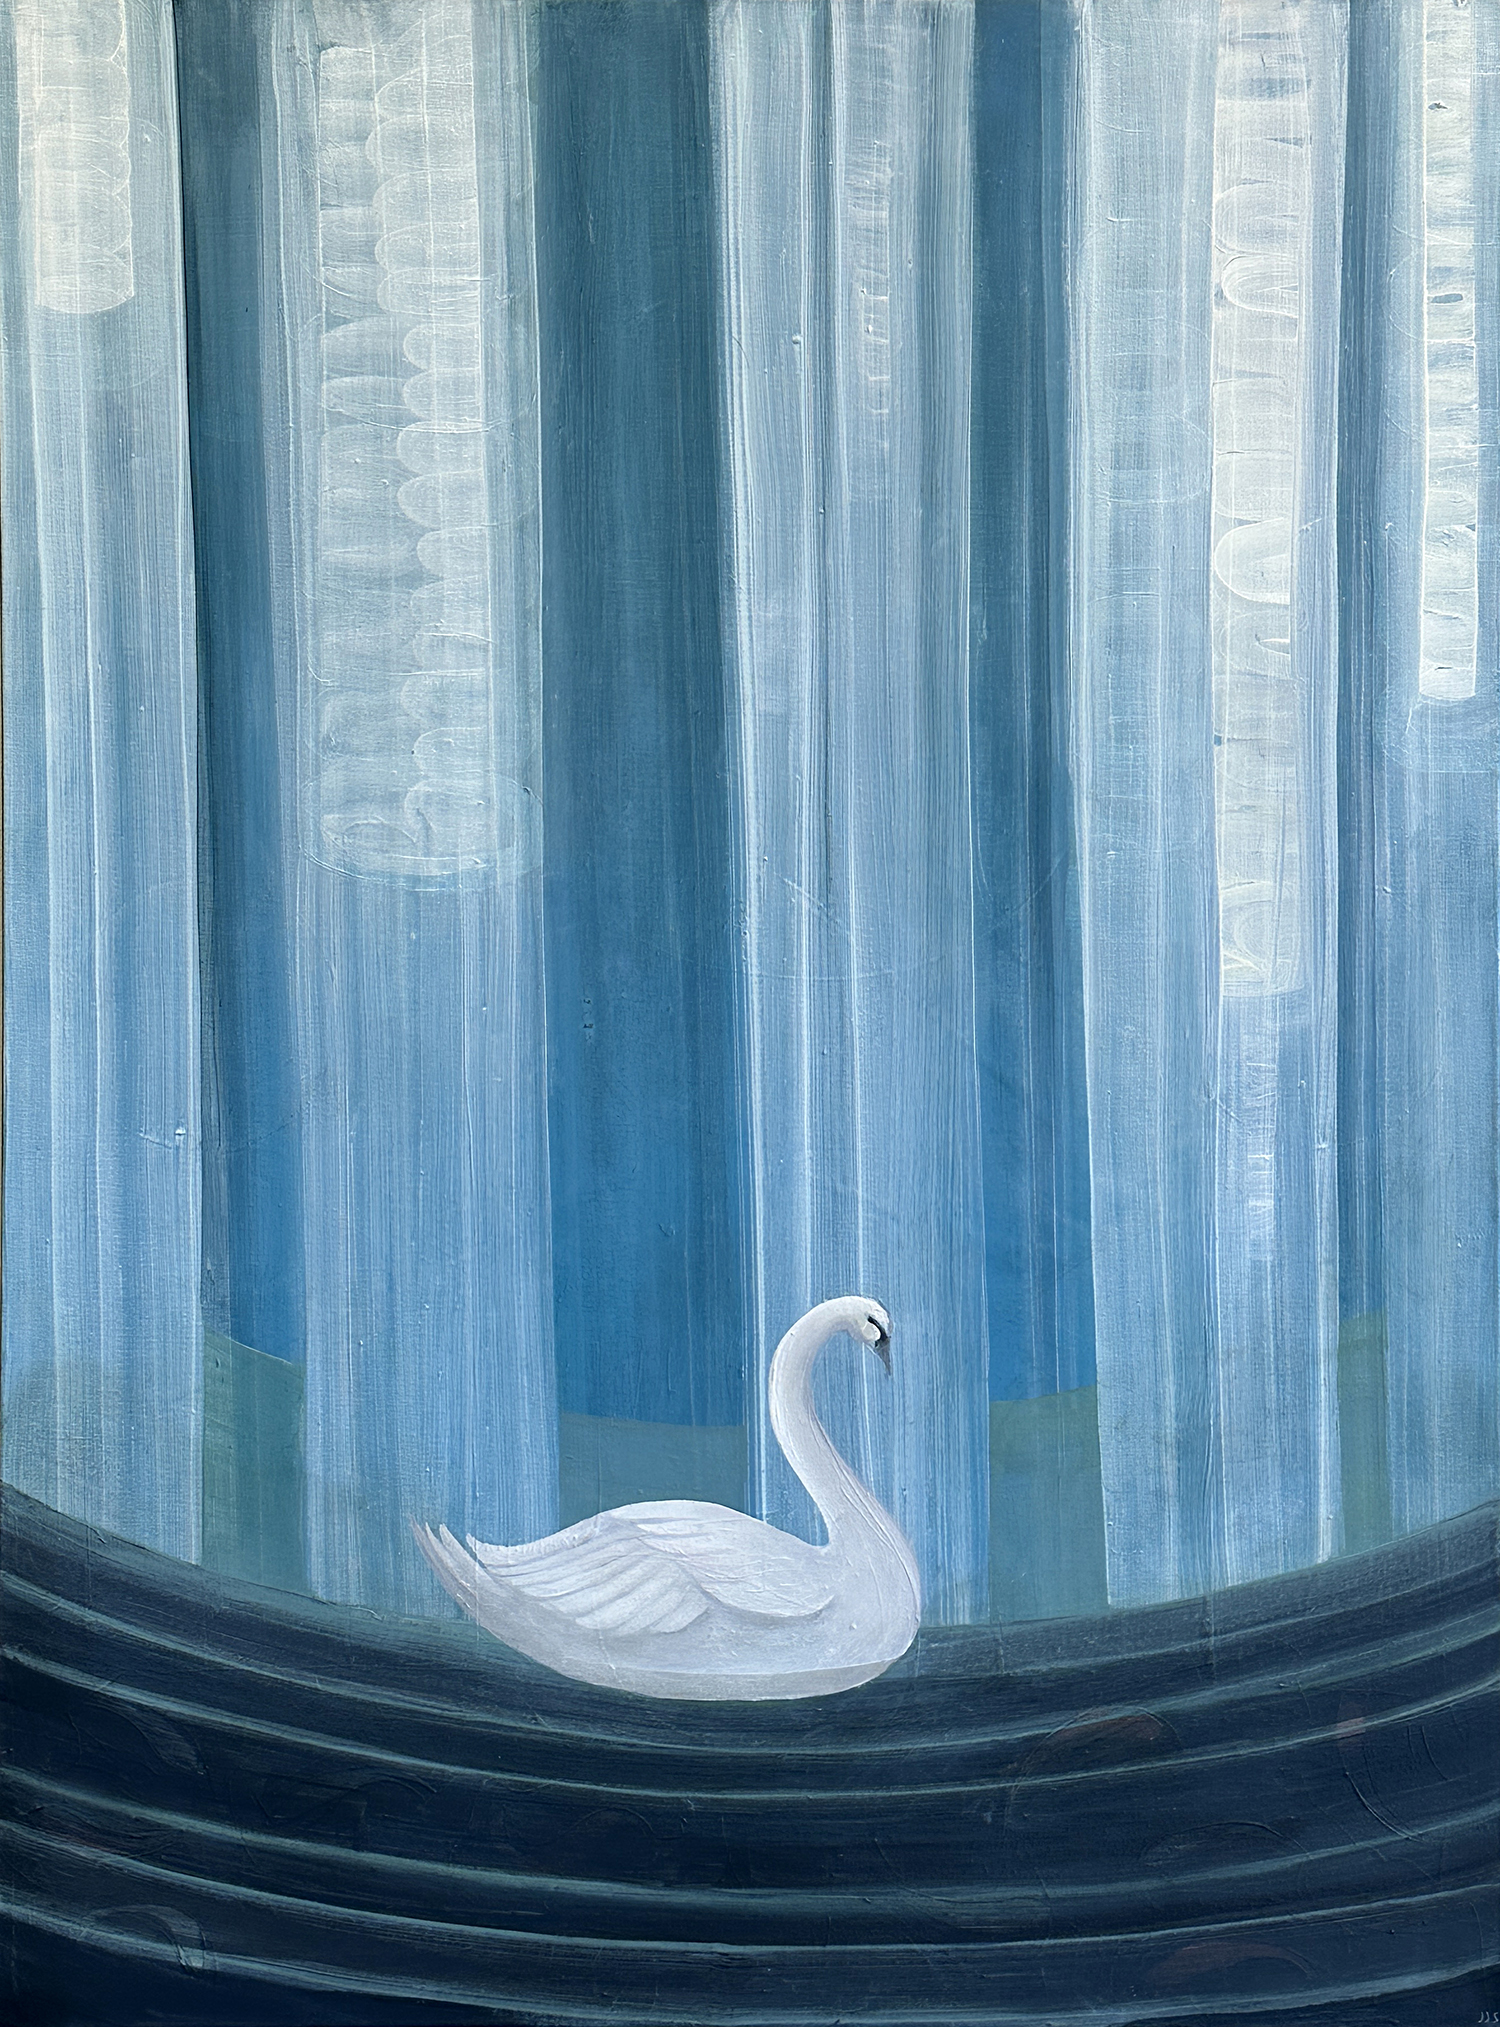 A white swan painting in the water, capturing a serene moment.